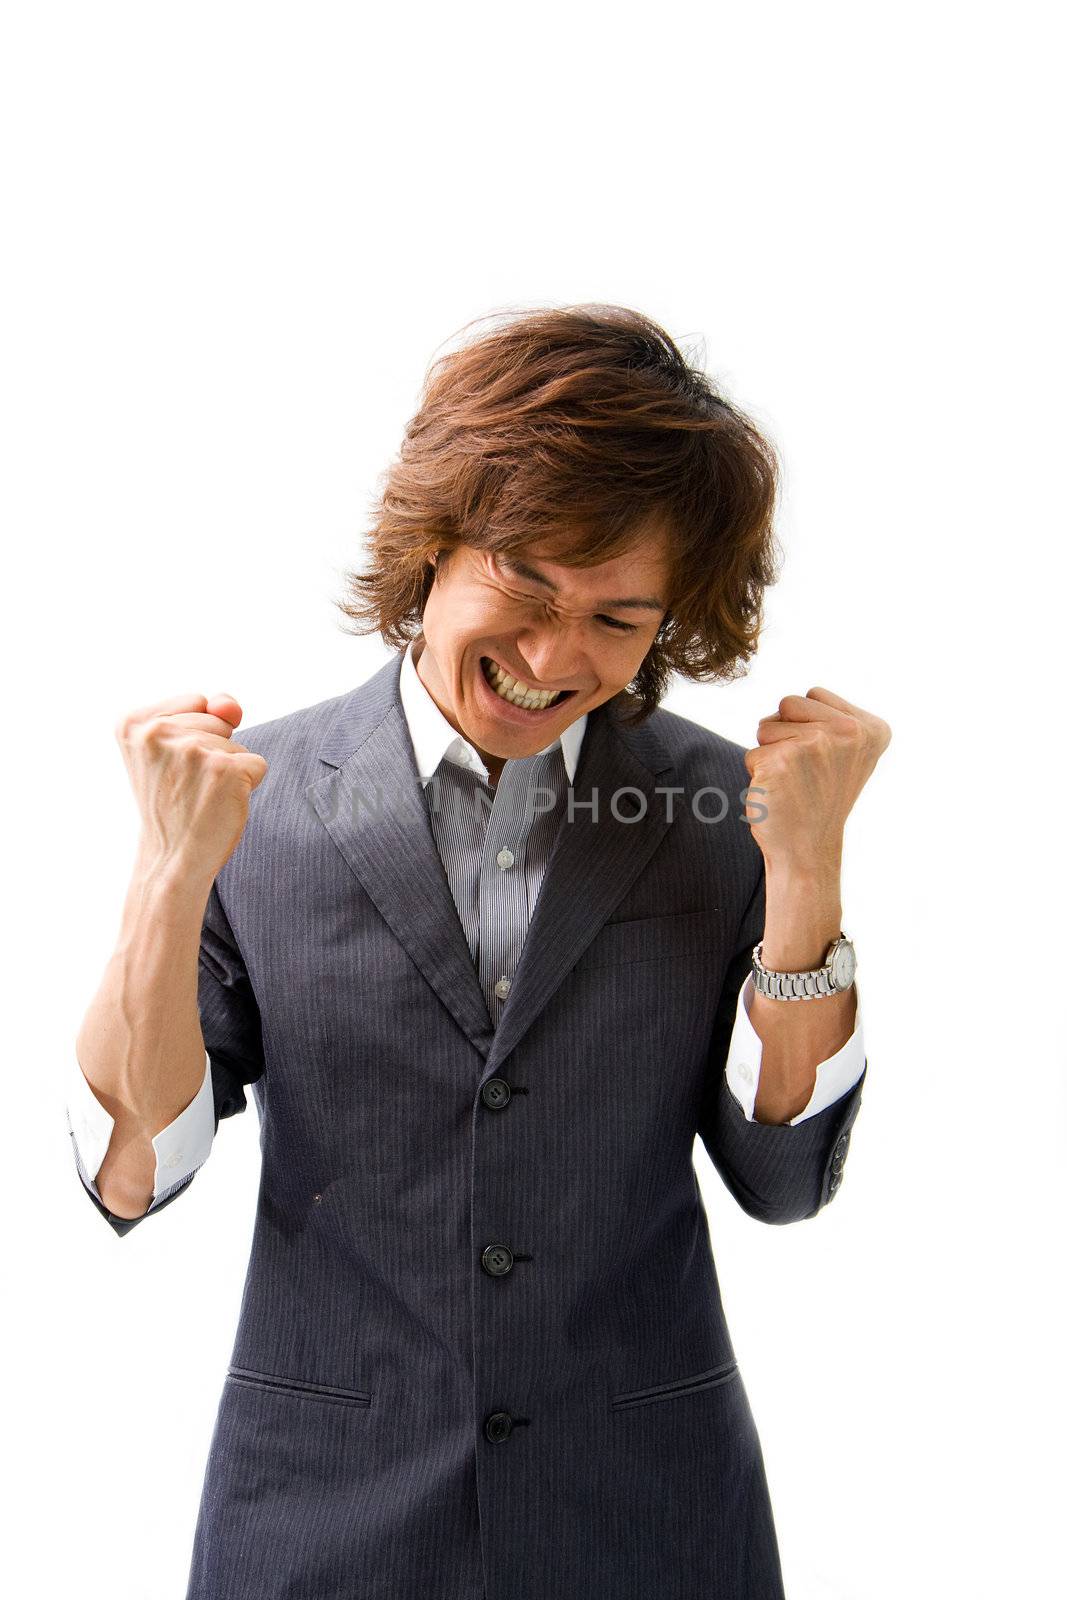 Young Asian business man celebrating a good deal, isolated